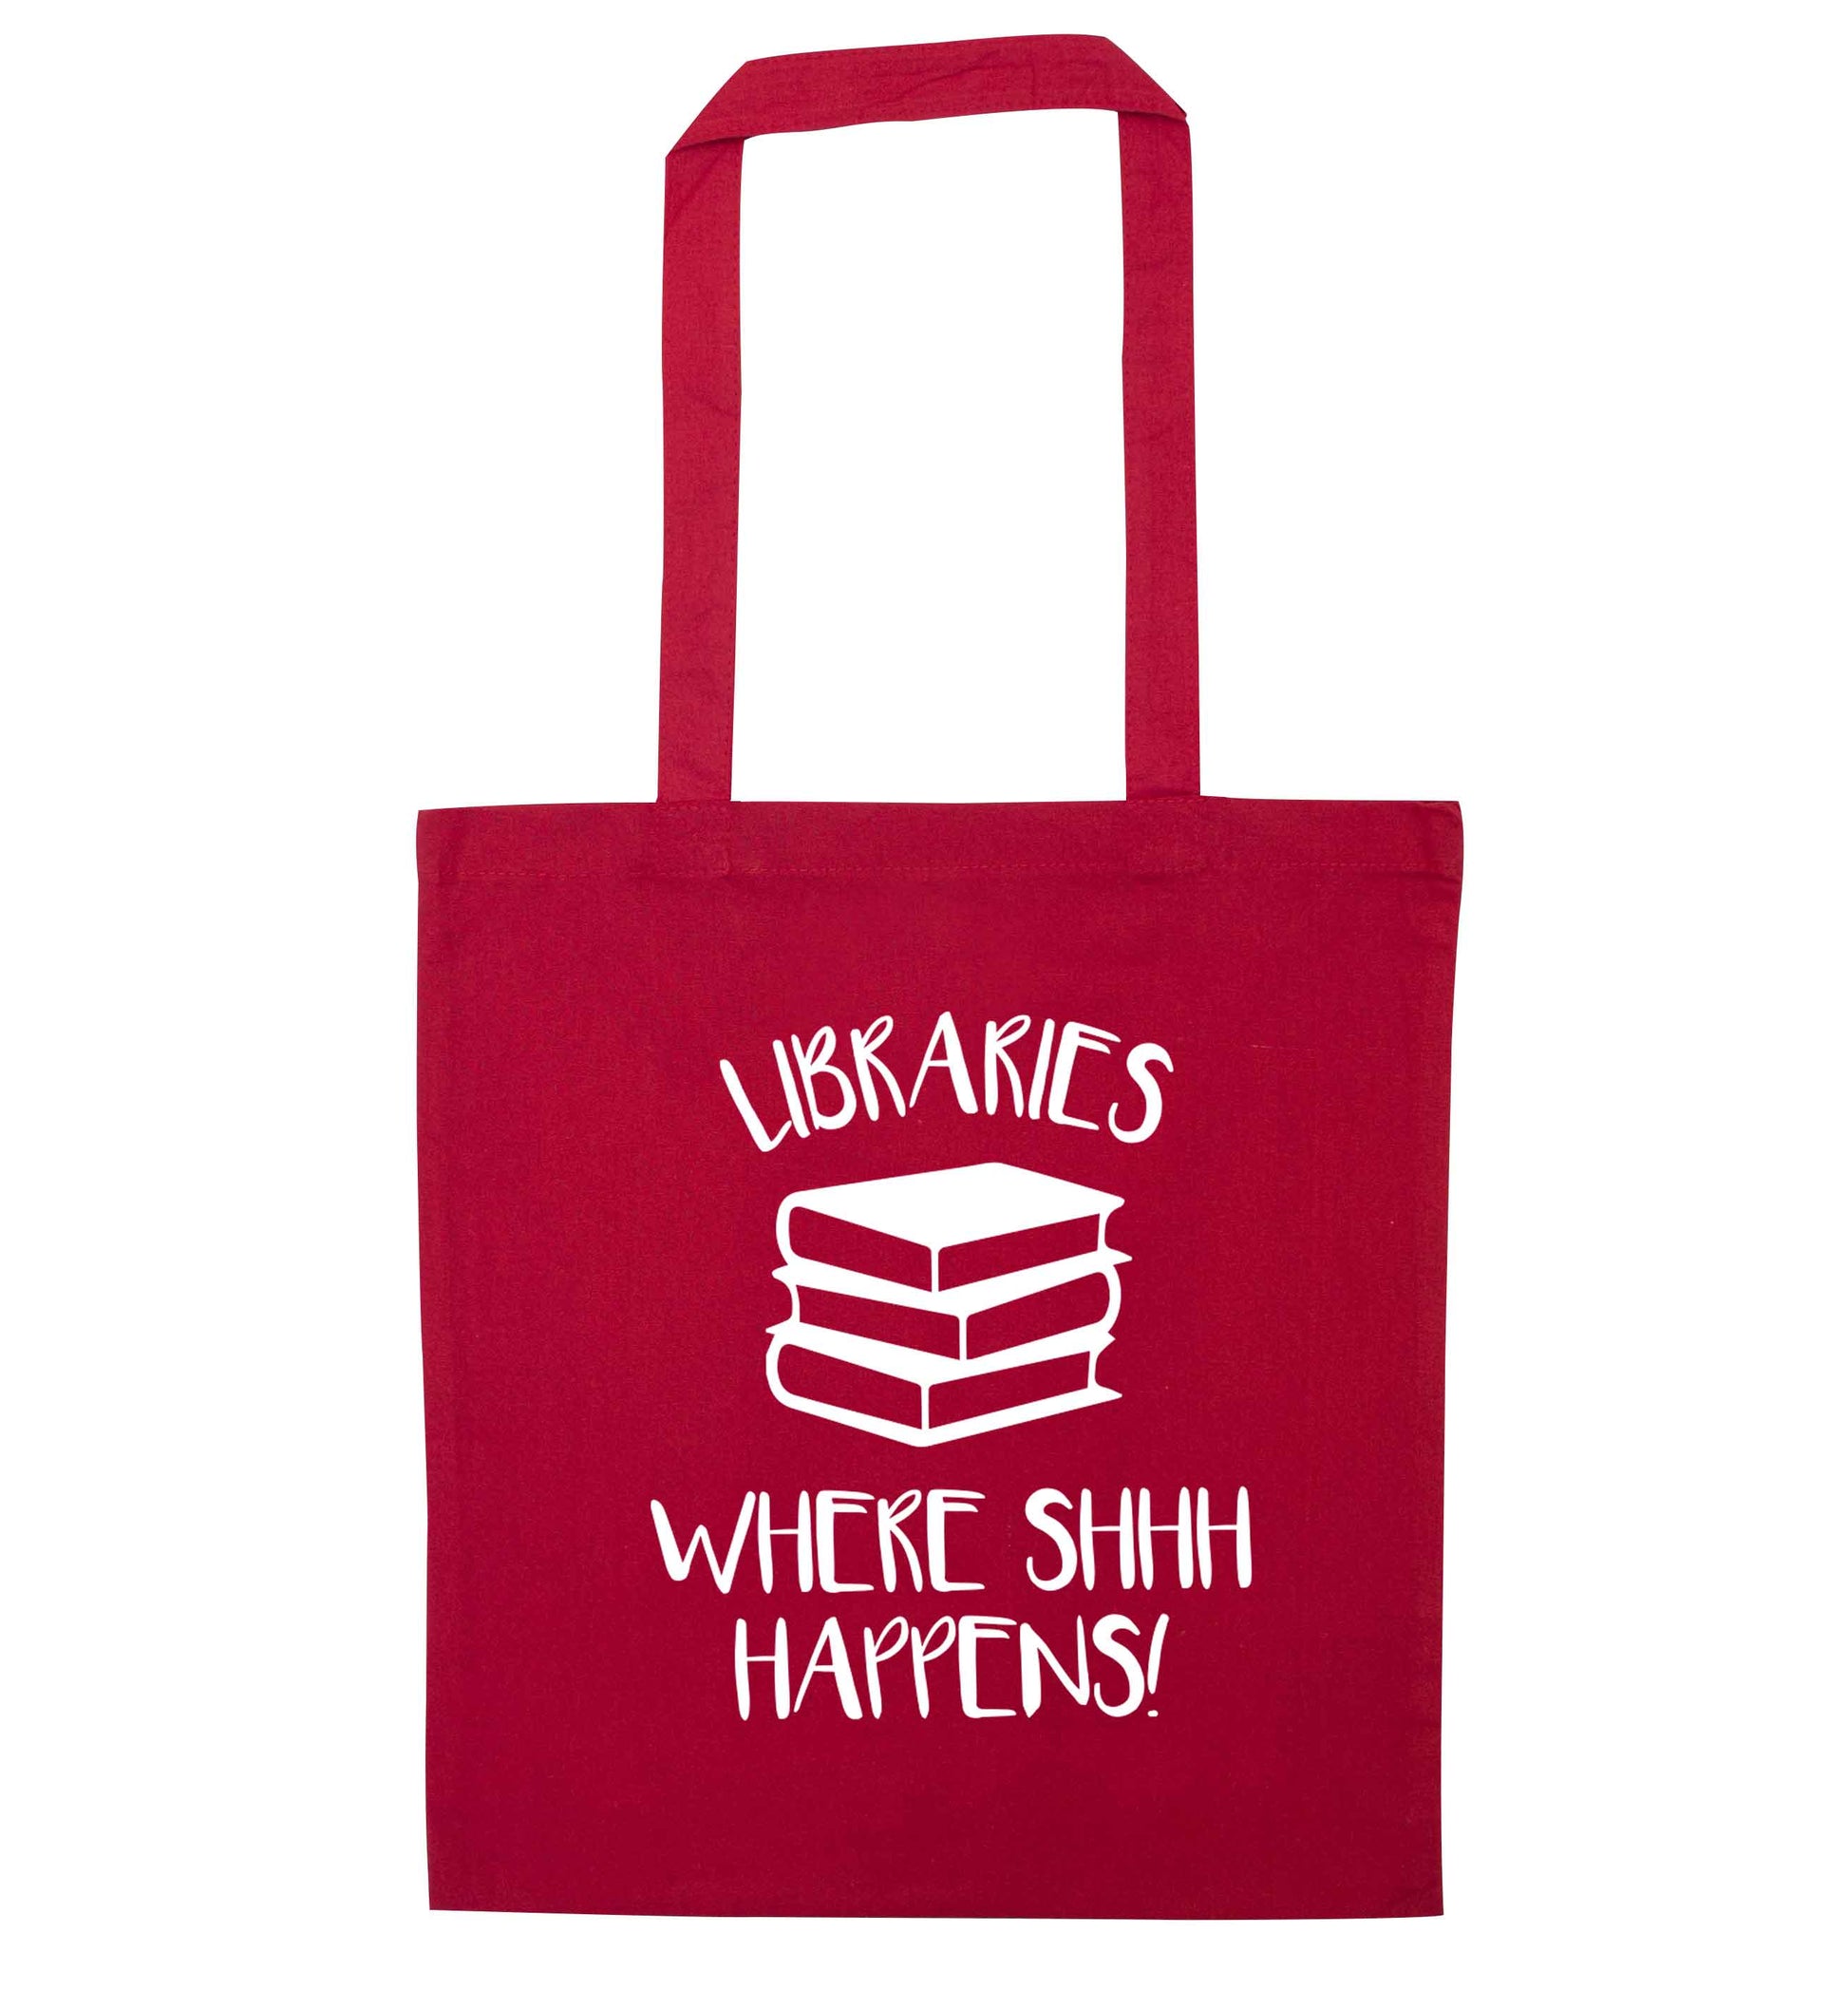 Libraries where shh happens! red tote bag